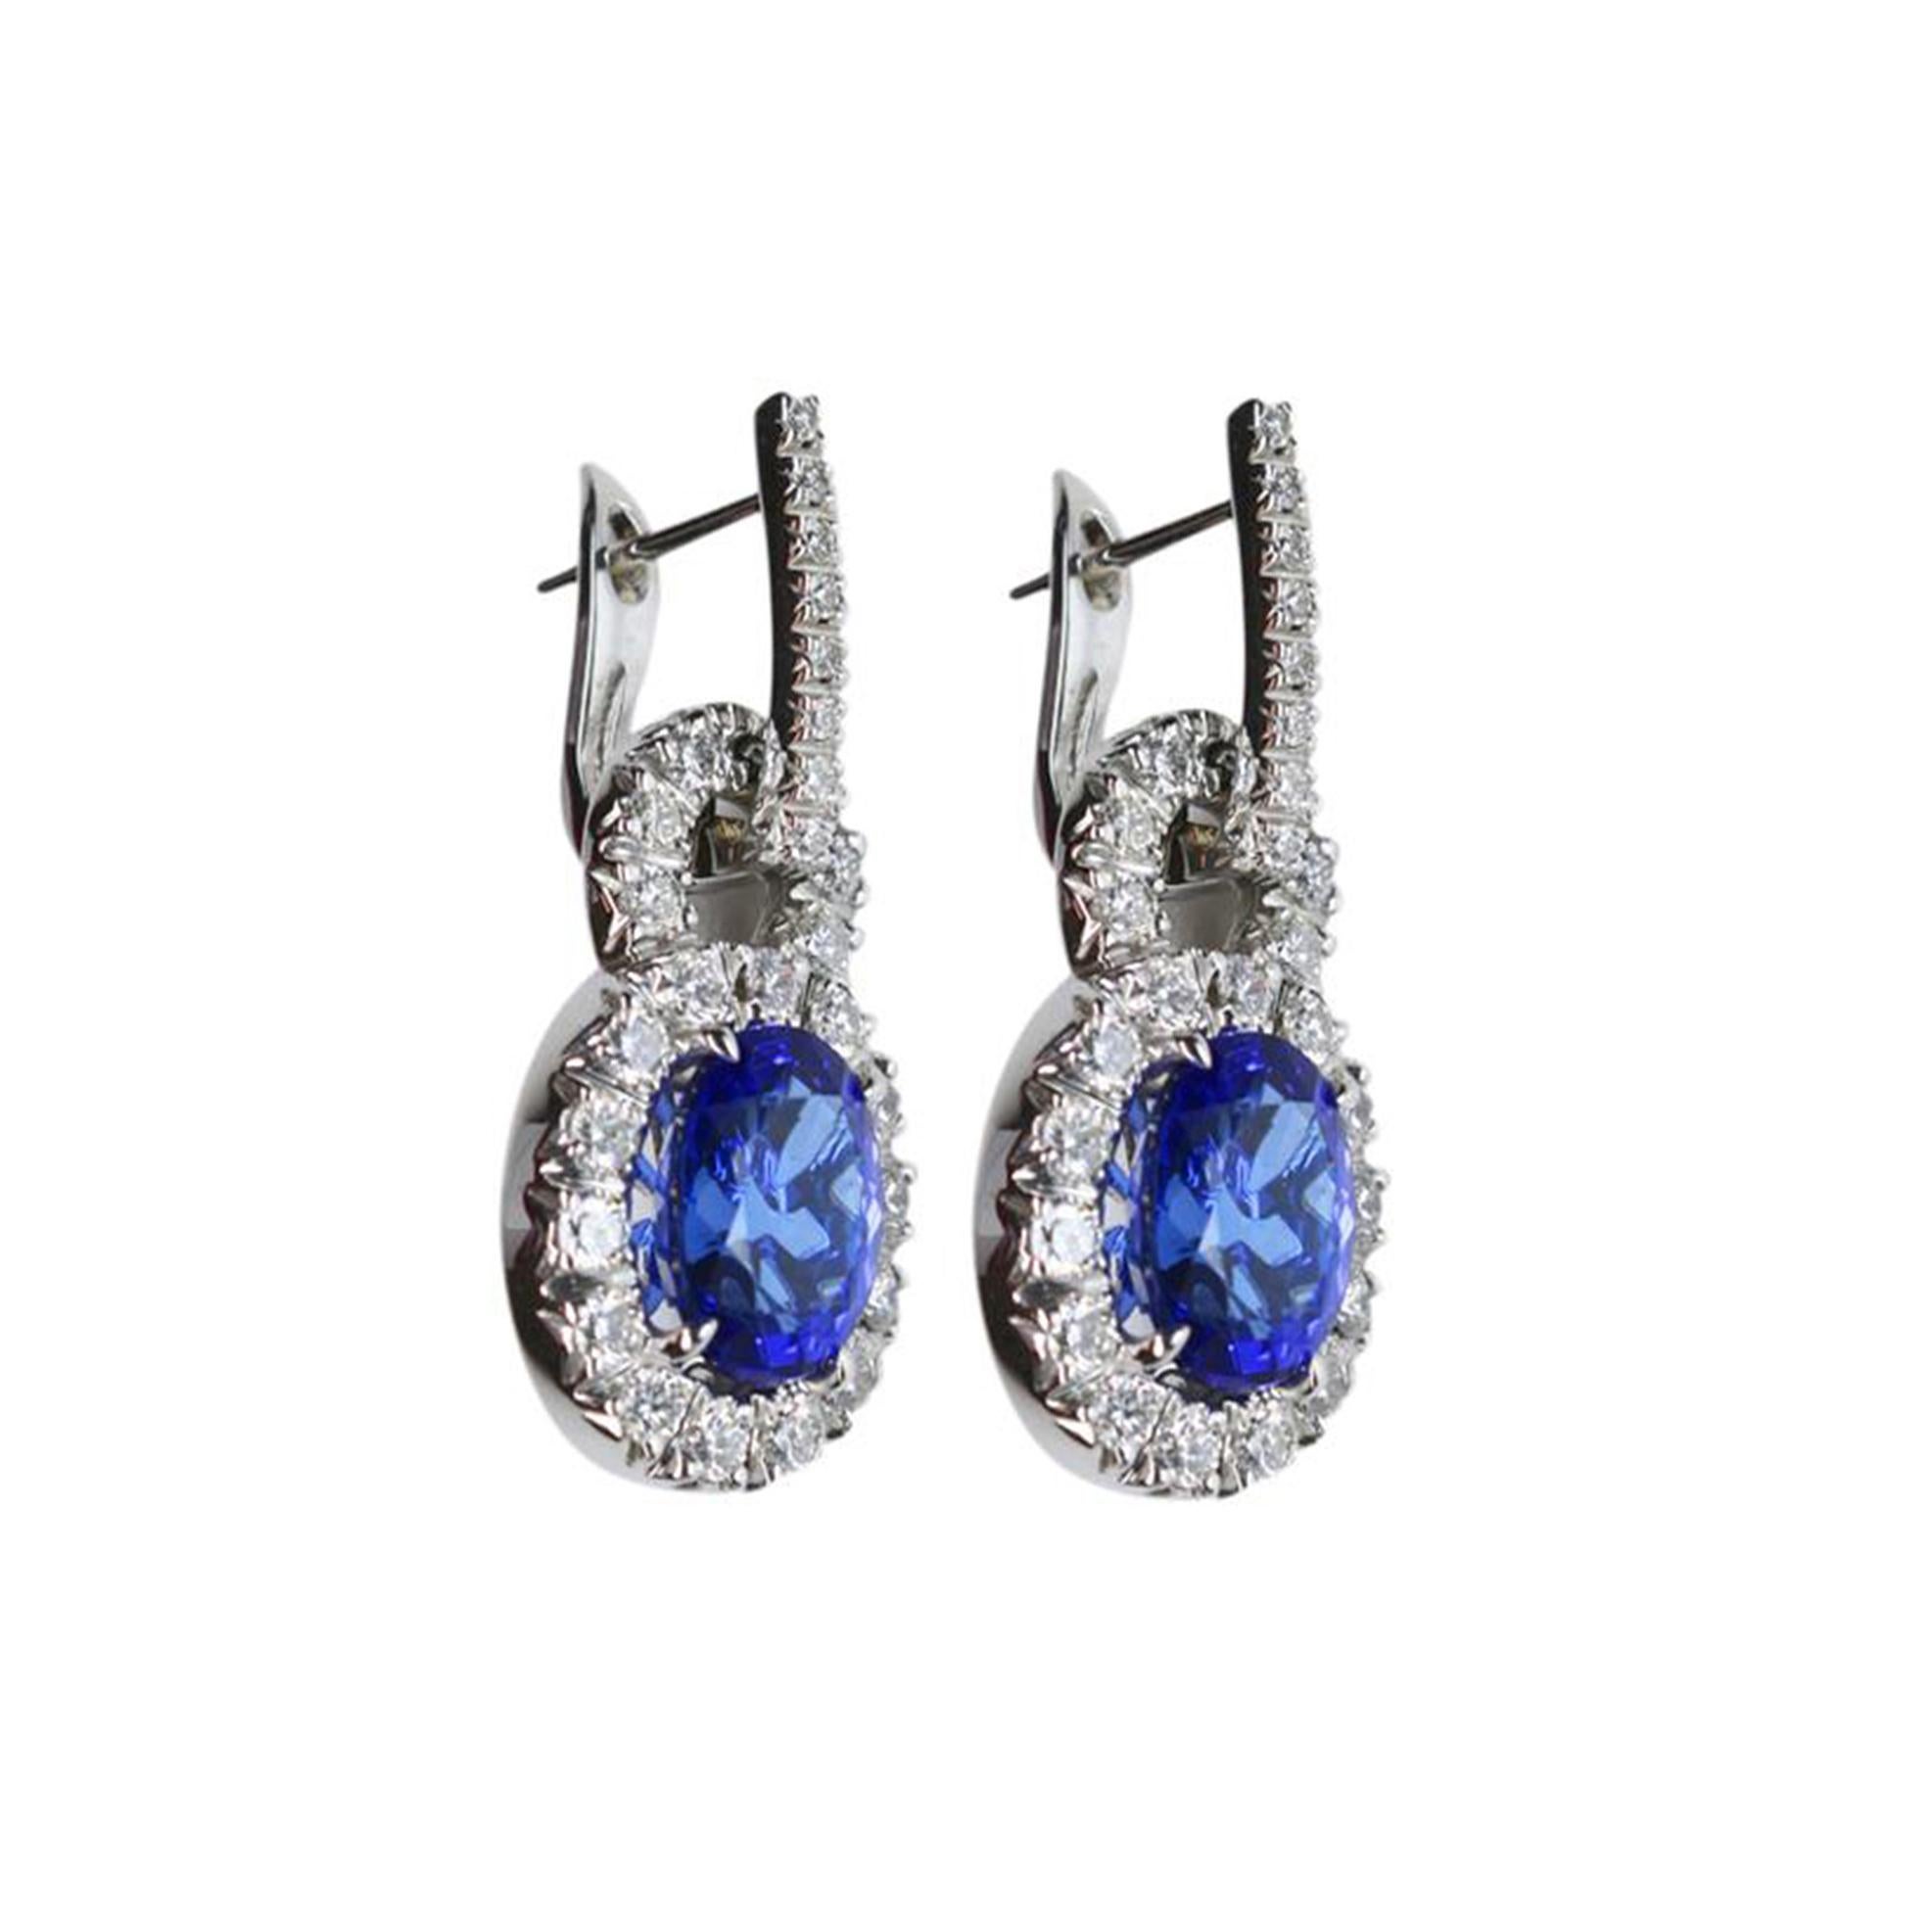 Beautiful, Elegant & finely detailed Drop Earrings, each Earring set with a Vivid Blue Tanzanite gemstone, clarity: I/F; surrounded by micro-set round brilliant cut Diamonds; approx. total weight of the 2 Tanzanite: 6.50 Carats; approx. total weight